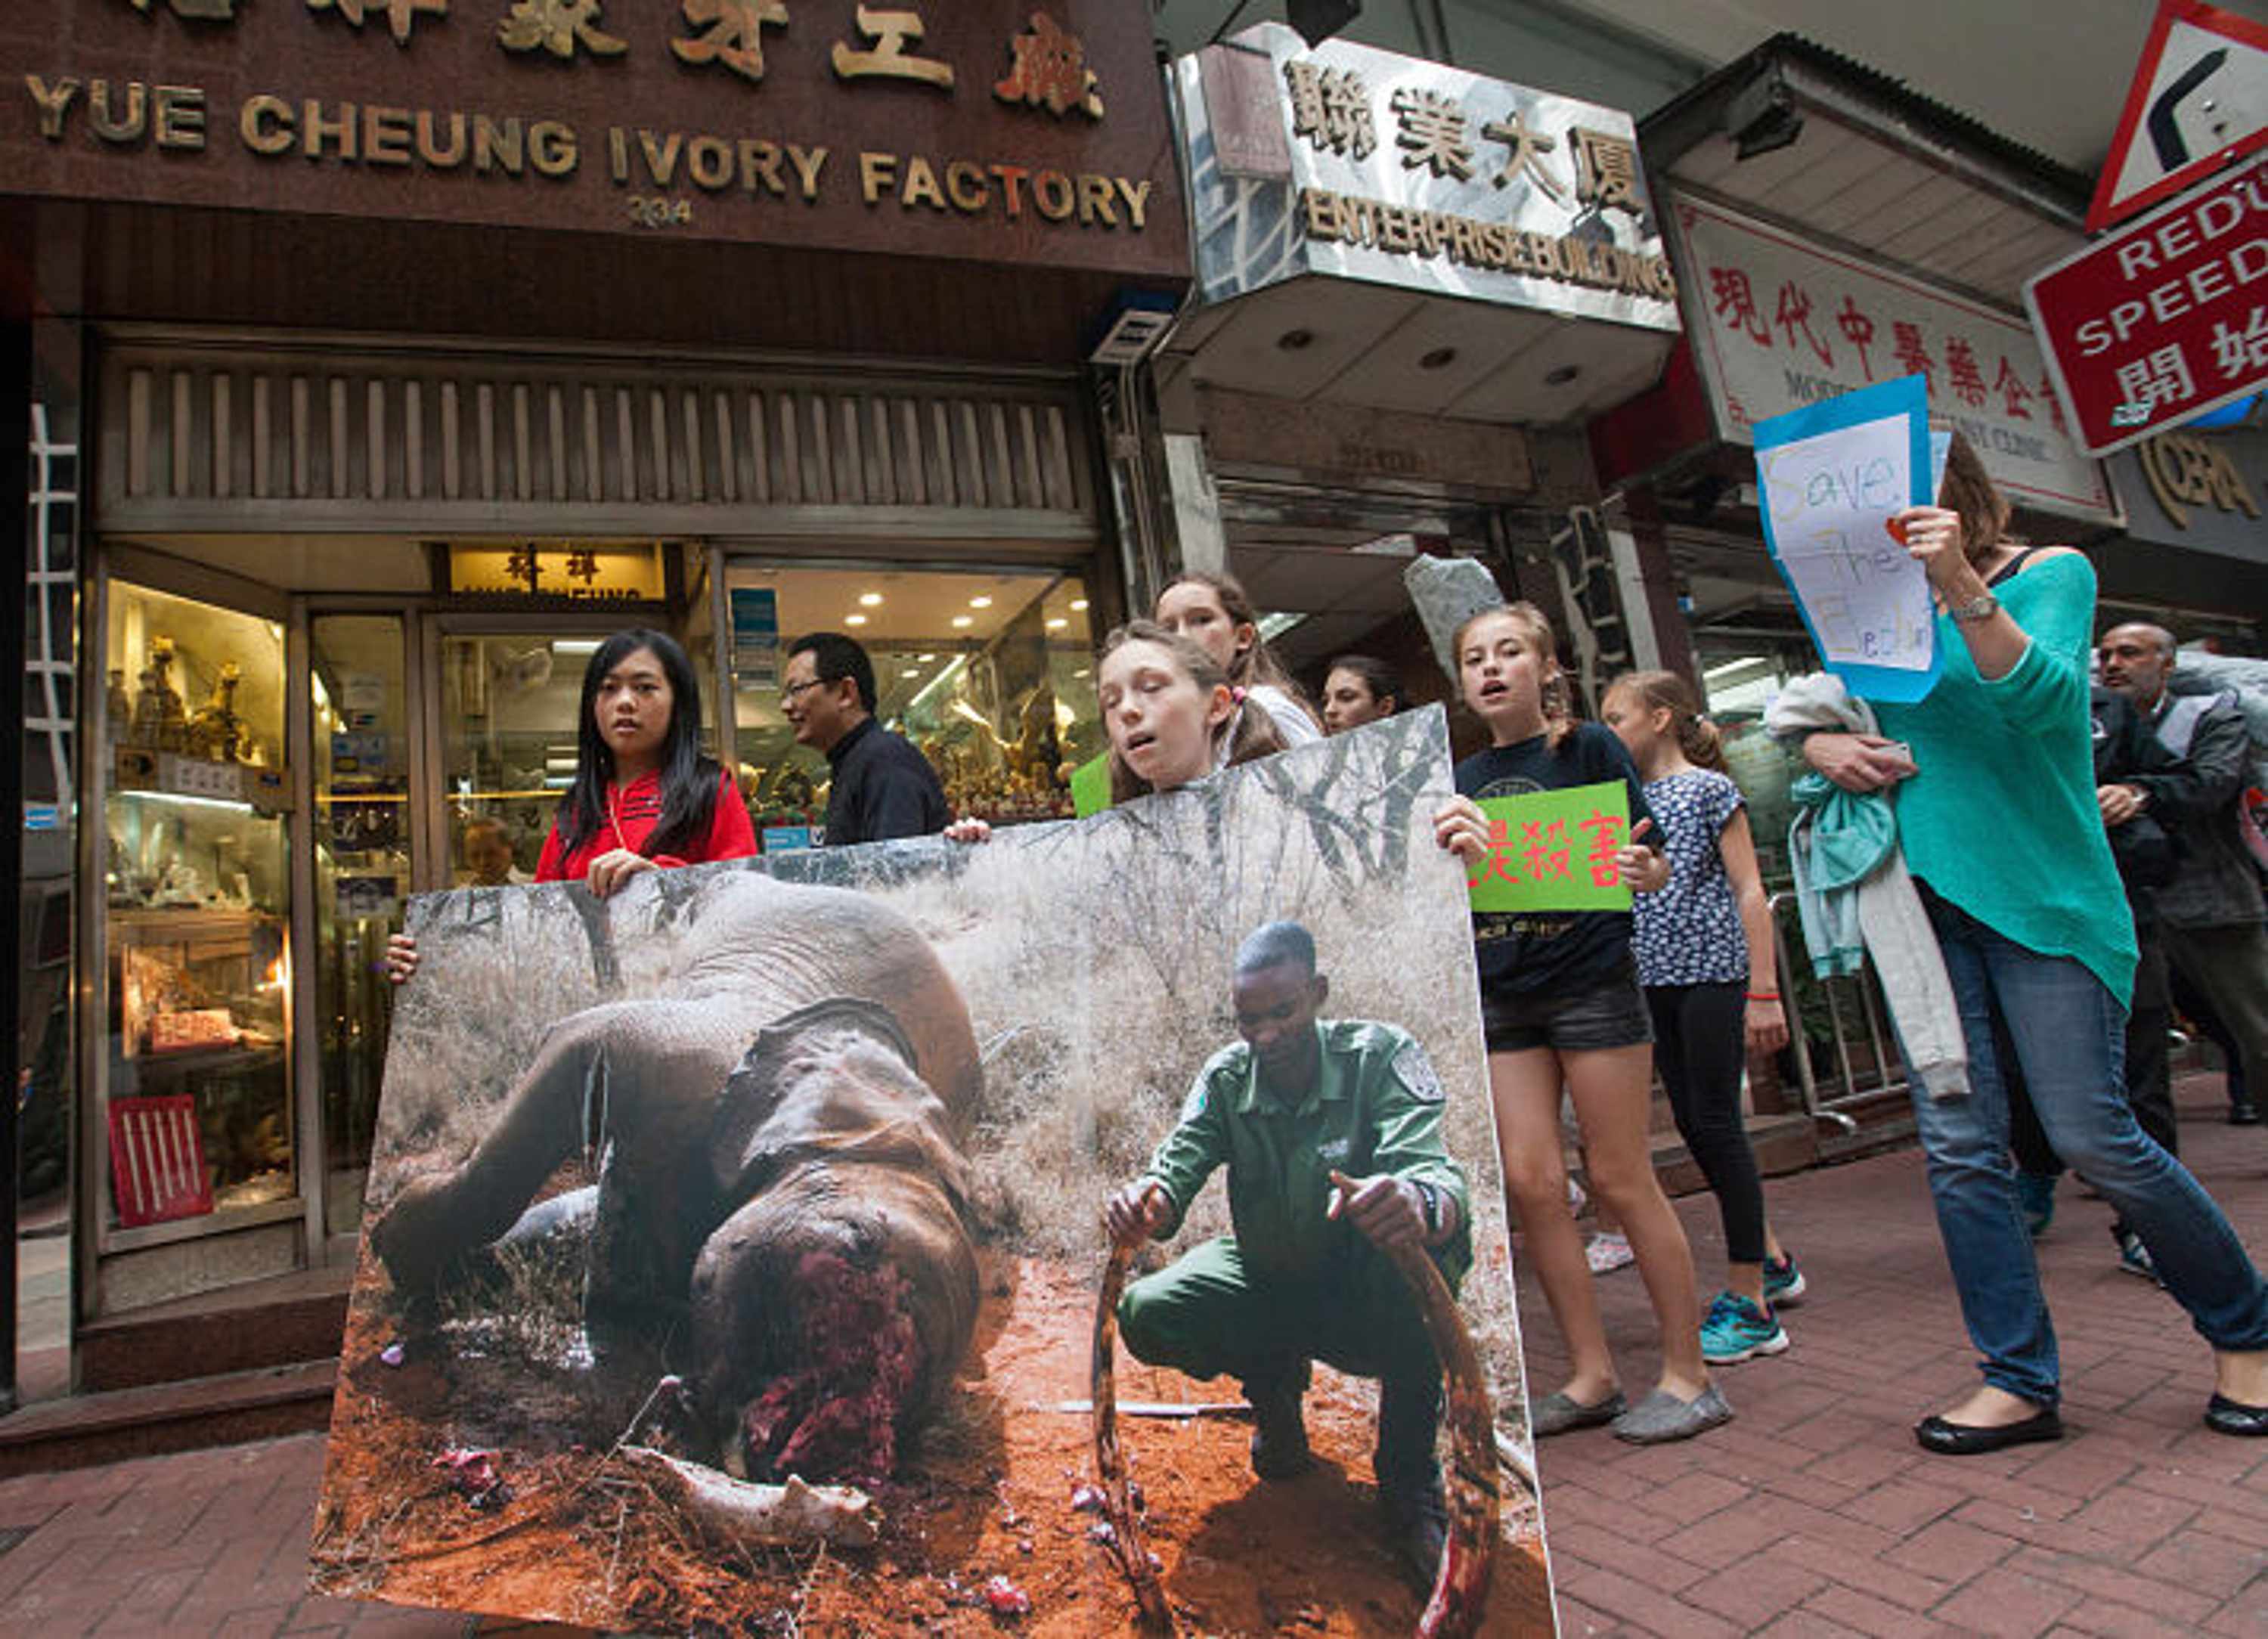 Children and adults protest against Hong Kong&#39;s legal ivory trade in the city&#39;s main ivory selling district of Hollywood Road and Queen&#39;s Road Central, Sheung Wan, Hong Kong, China, 14 March 2015.  According to Kenya-based NGO &#39;Save the Elephants&#39;, 100,000 elephants were illegally-killed for their tusks from 2010 to 2012, a poaching crisis driven in large part by consumers in Hong Kong and China.